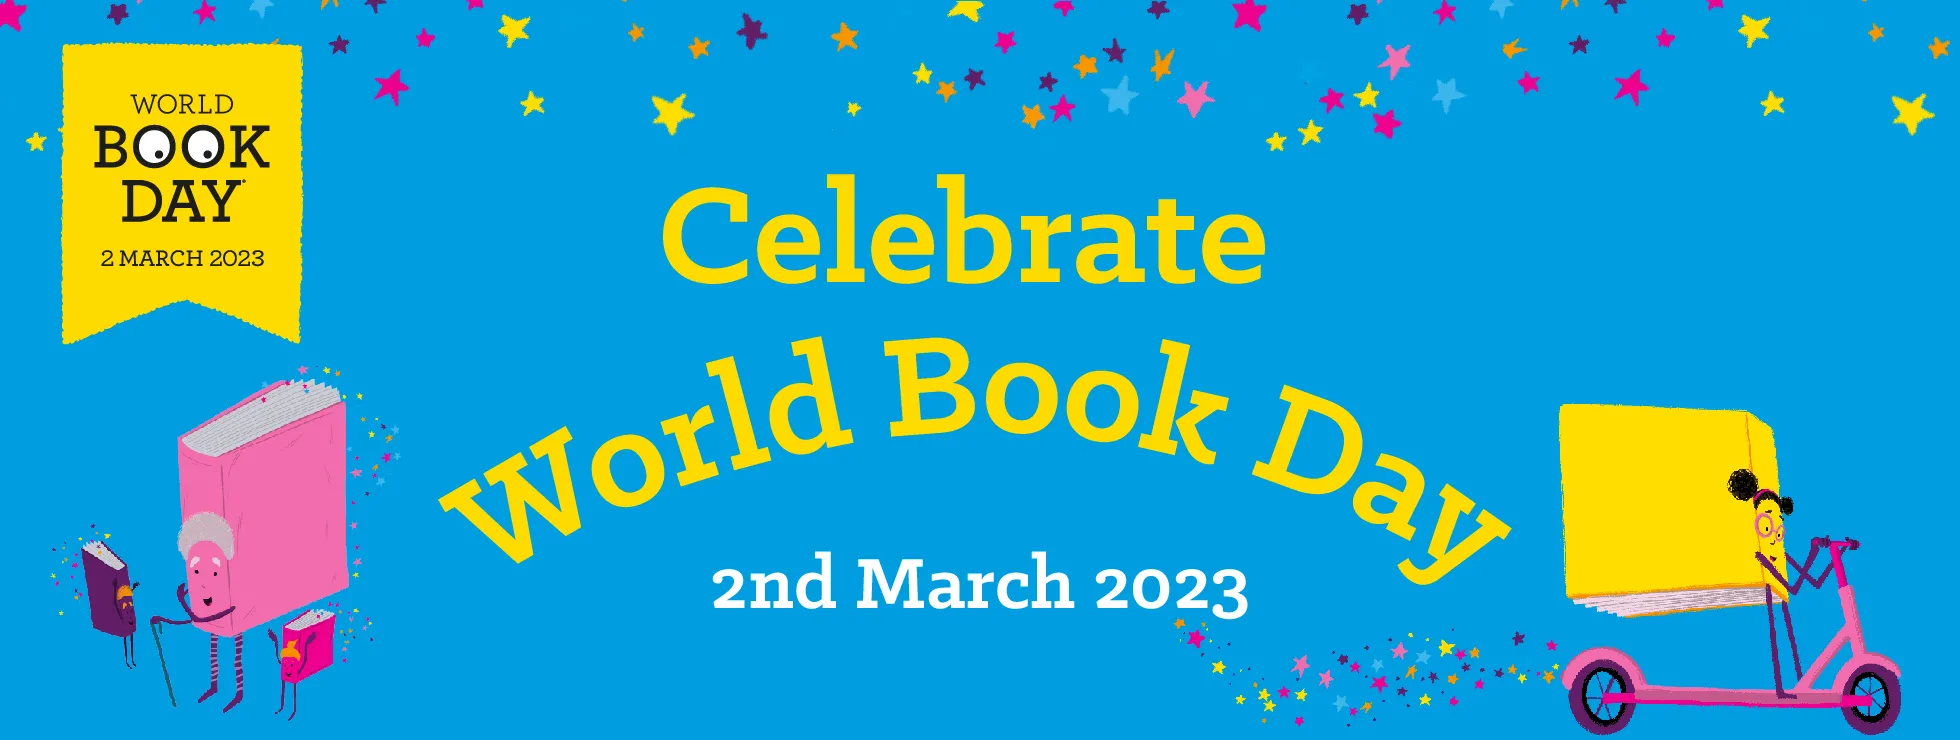 Banner showing World Book Day branding for 2nd March 2023, with illustrations by Allen Fatimaharan